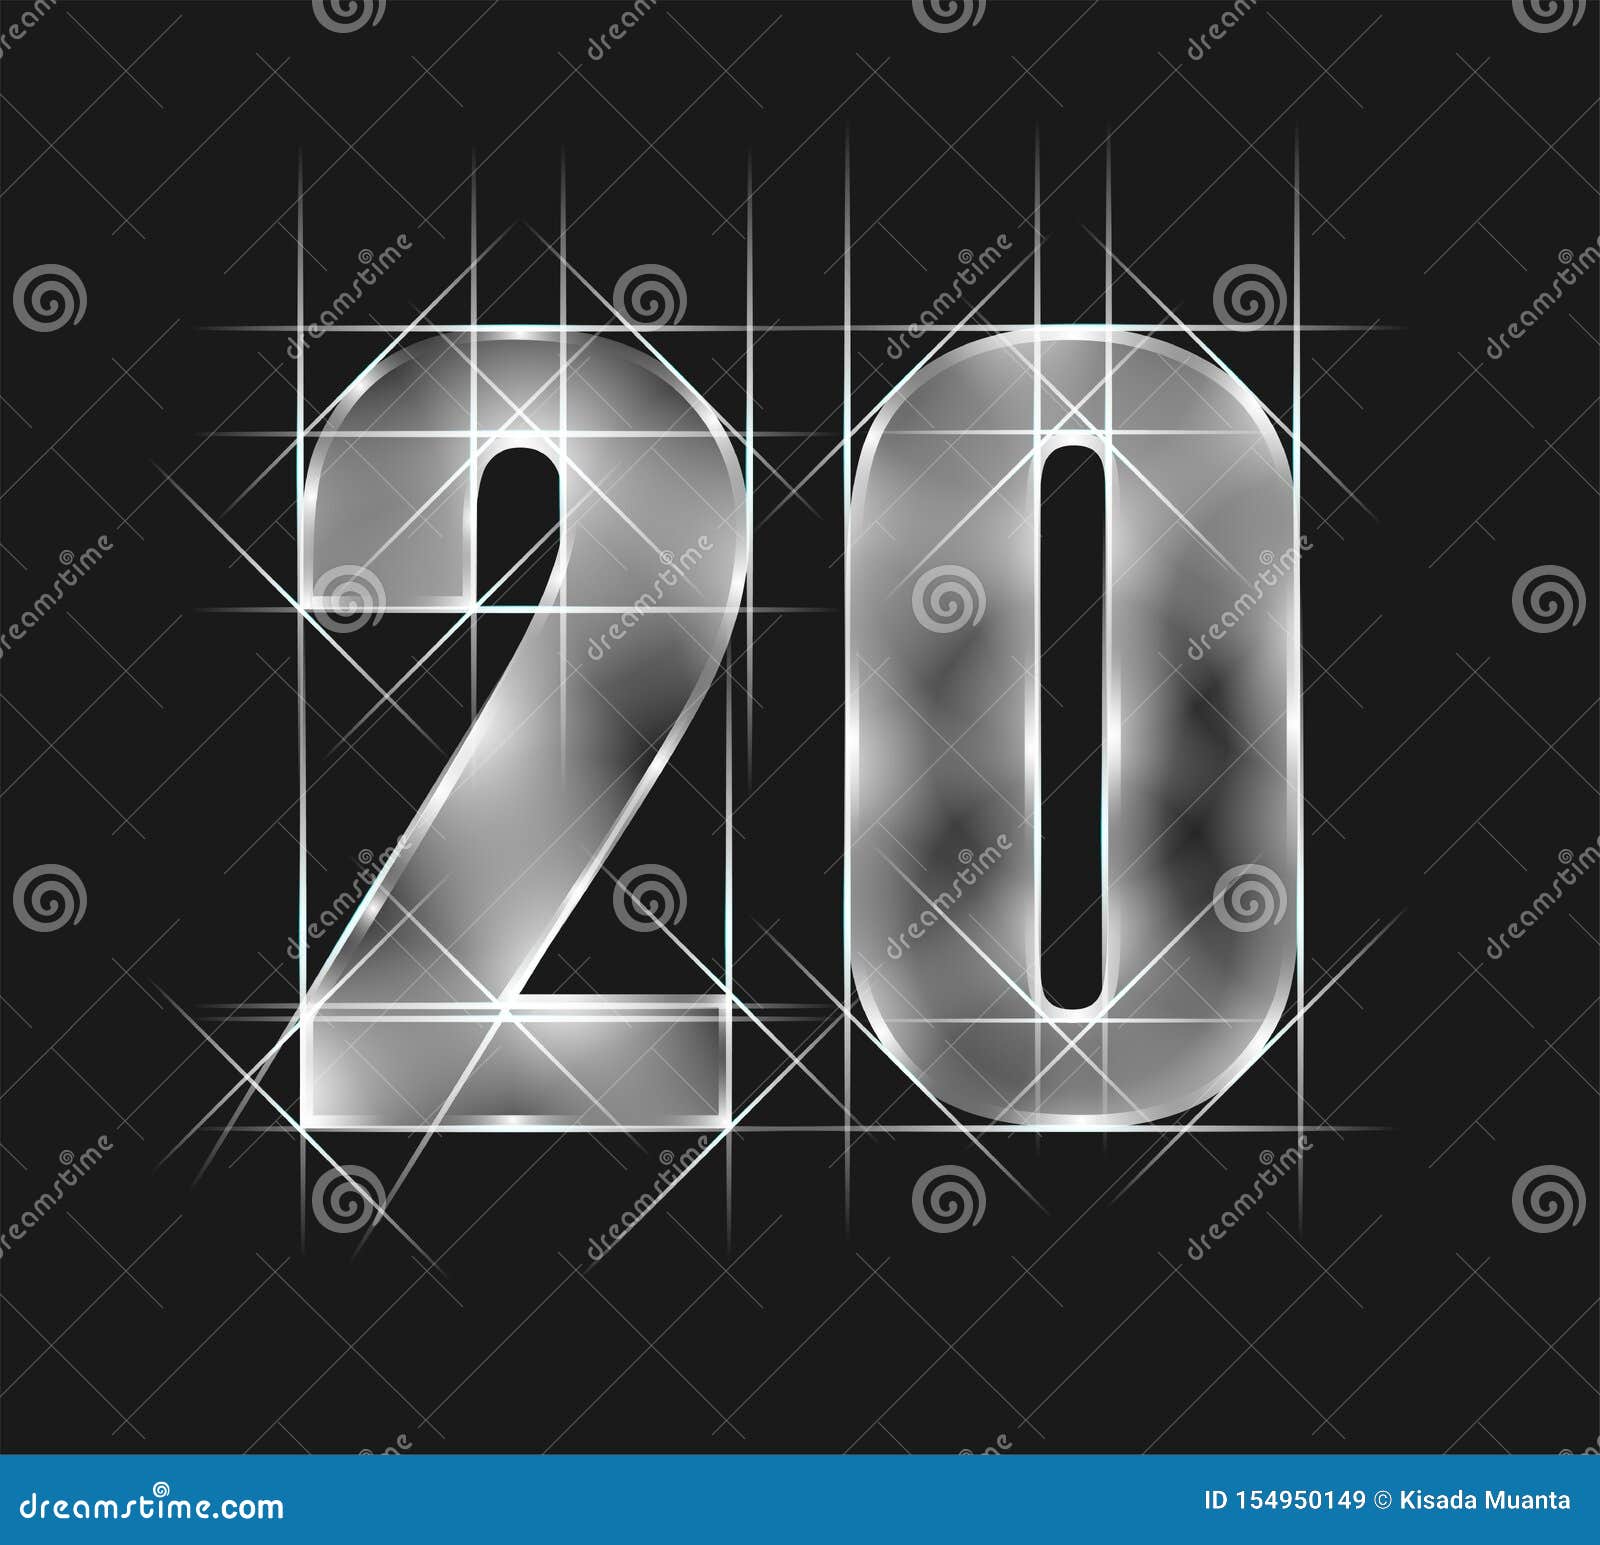 luxury abstract scintillation emerald crystal glass number 20 twenty character. gray tone background.   eps10